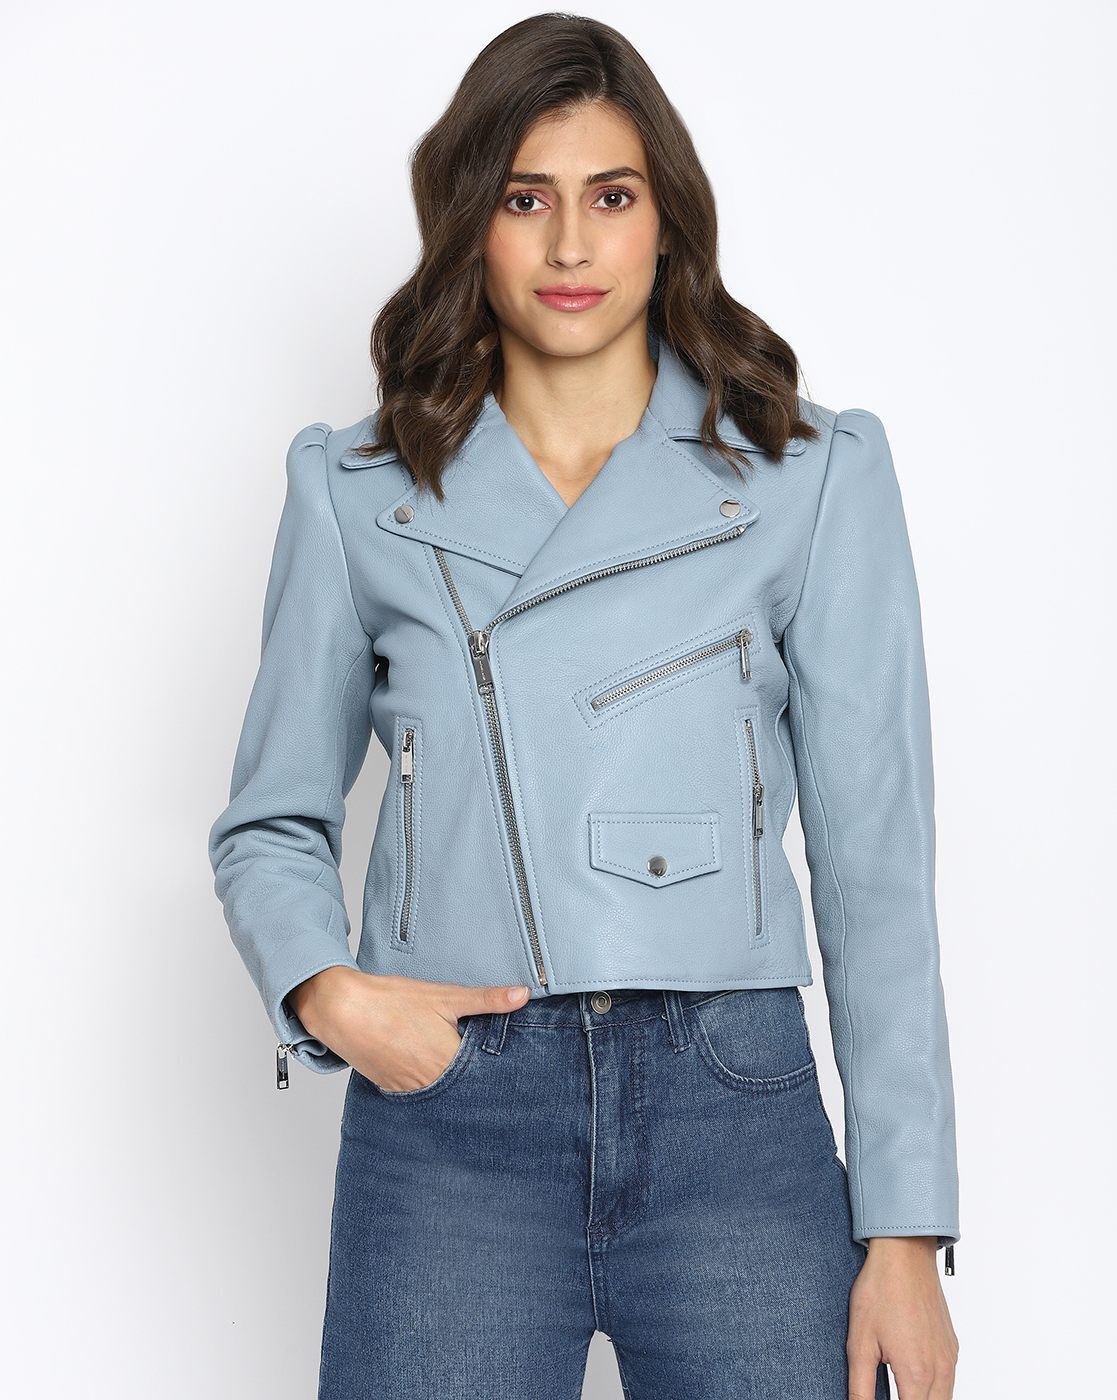 Buy Michael Kors Pebbled Leather Moto Jacket with Puff Sleeves  Chambray  Color Women  AJIO LUXE